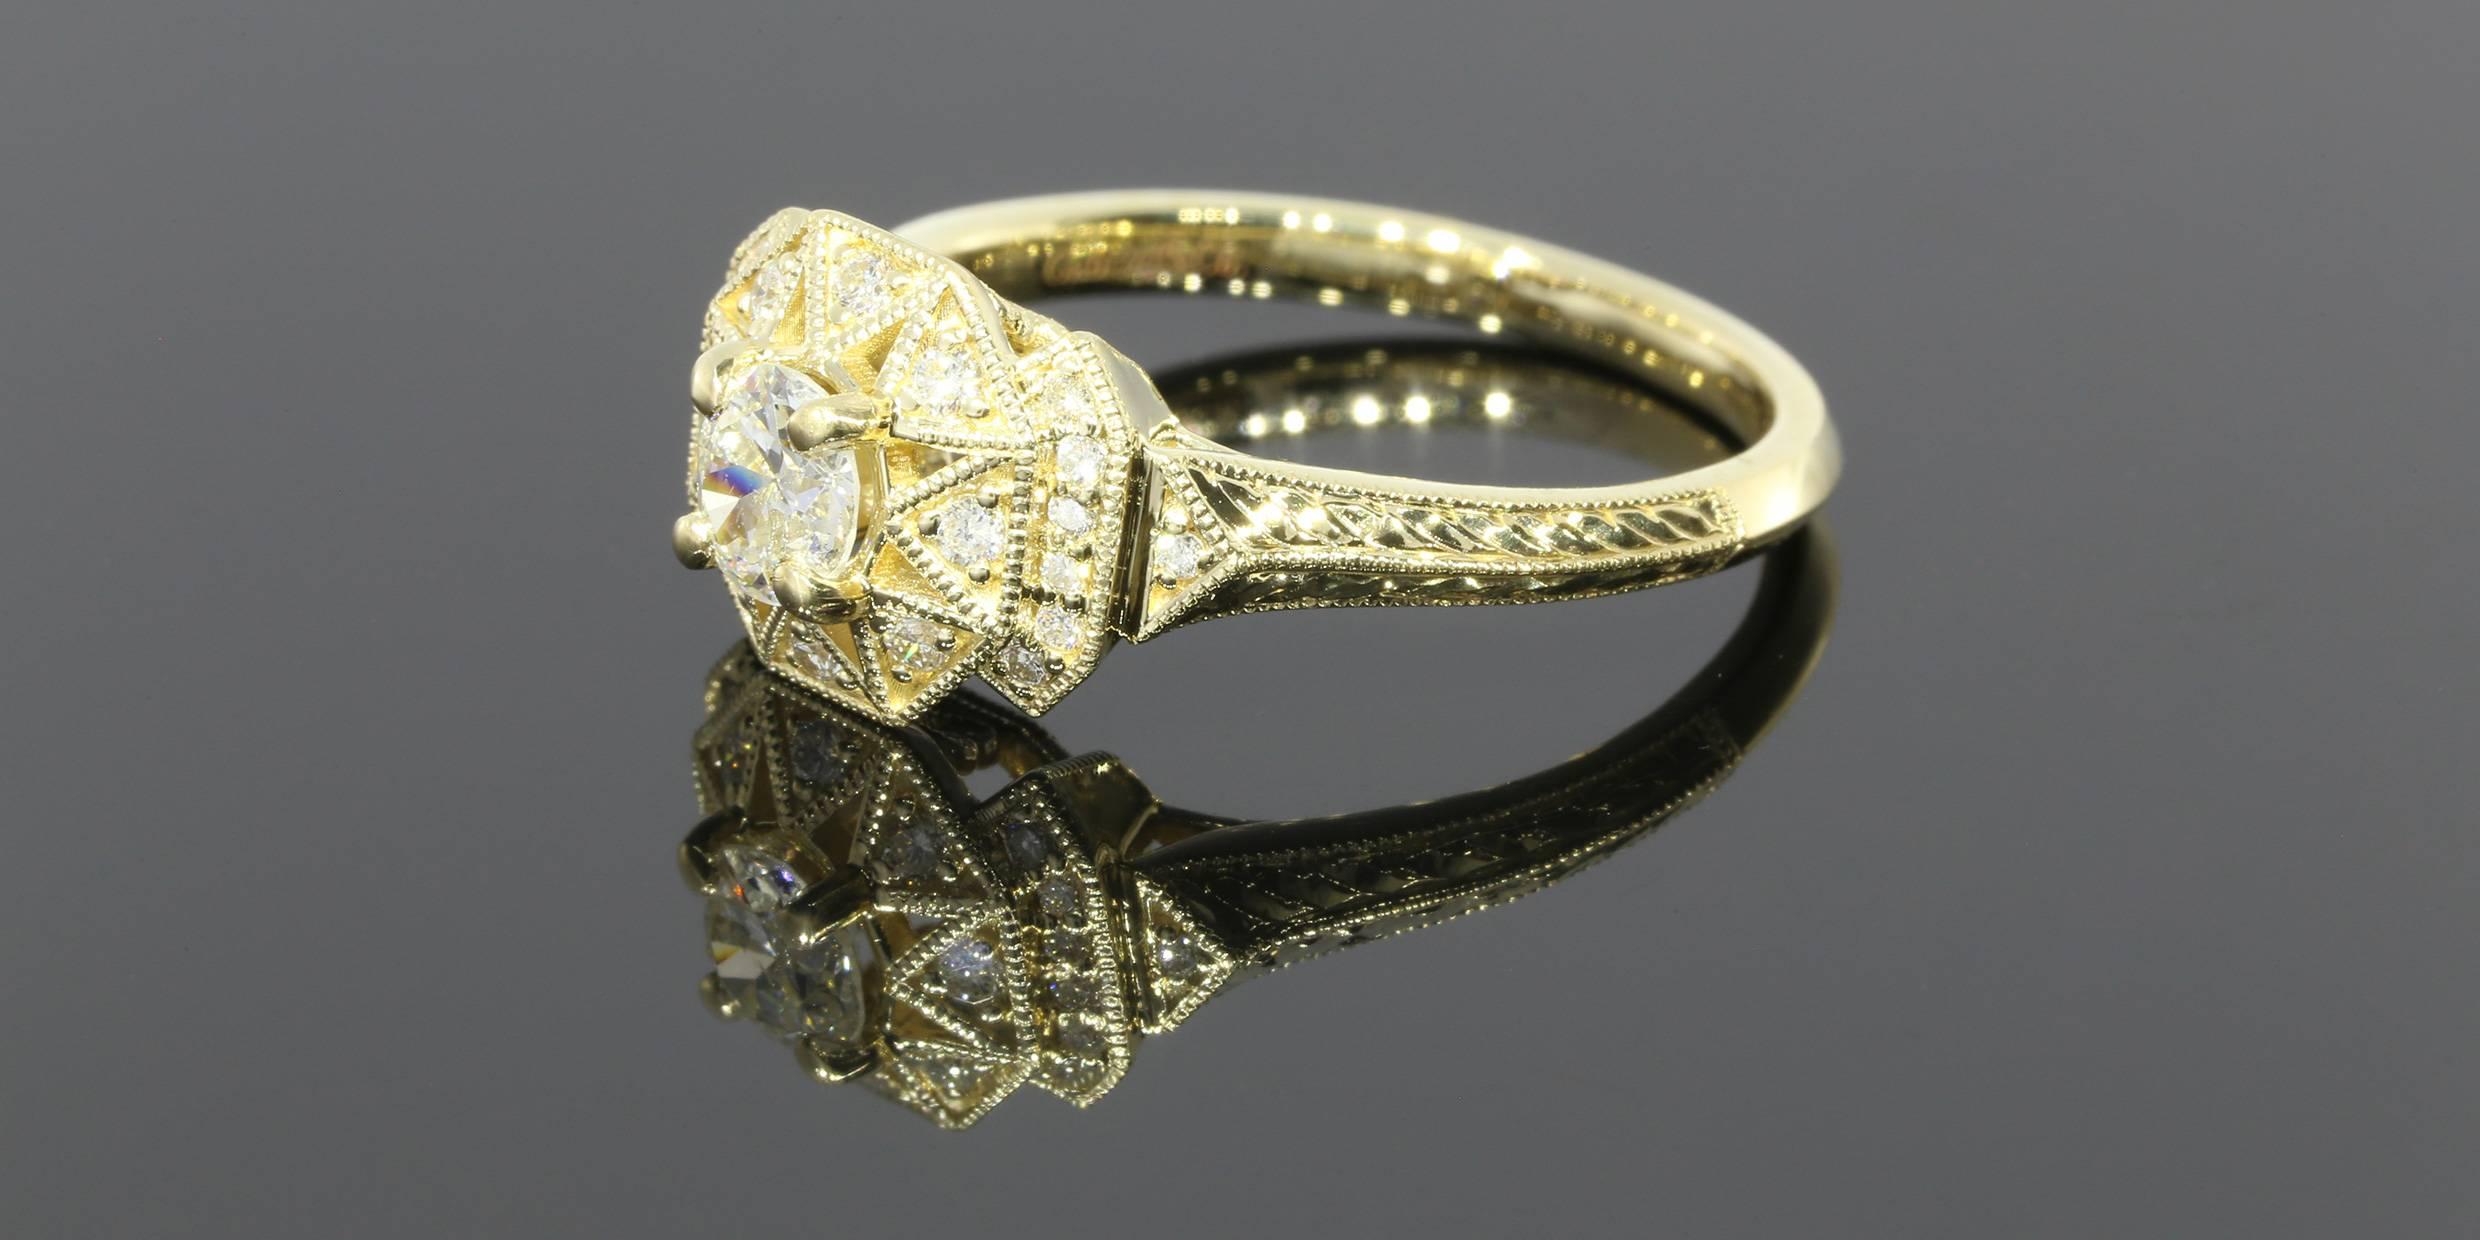 This engagement ring is Art Deco in design with geometric shapes and the yellow gold gives it an Aztec vibe. The Global Gemological Laboratories graded this diamond engagement ring and has given it an approximate total carat weight of .50CTW. The